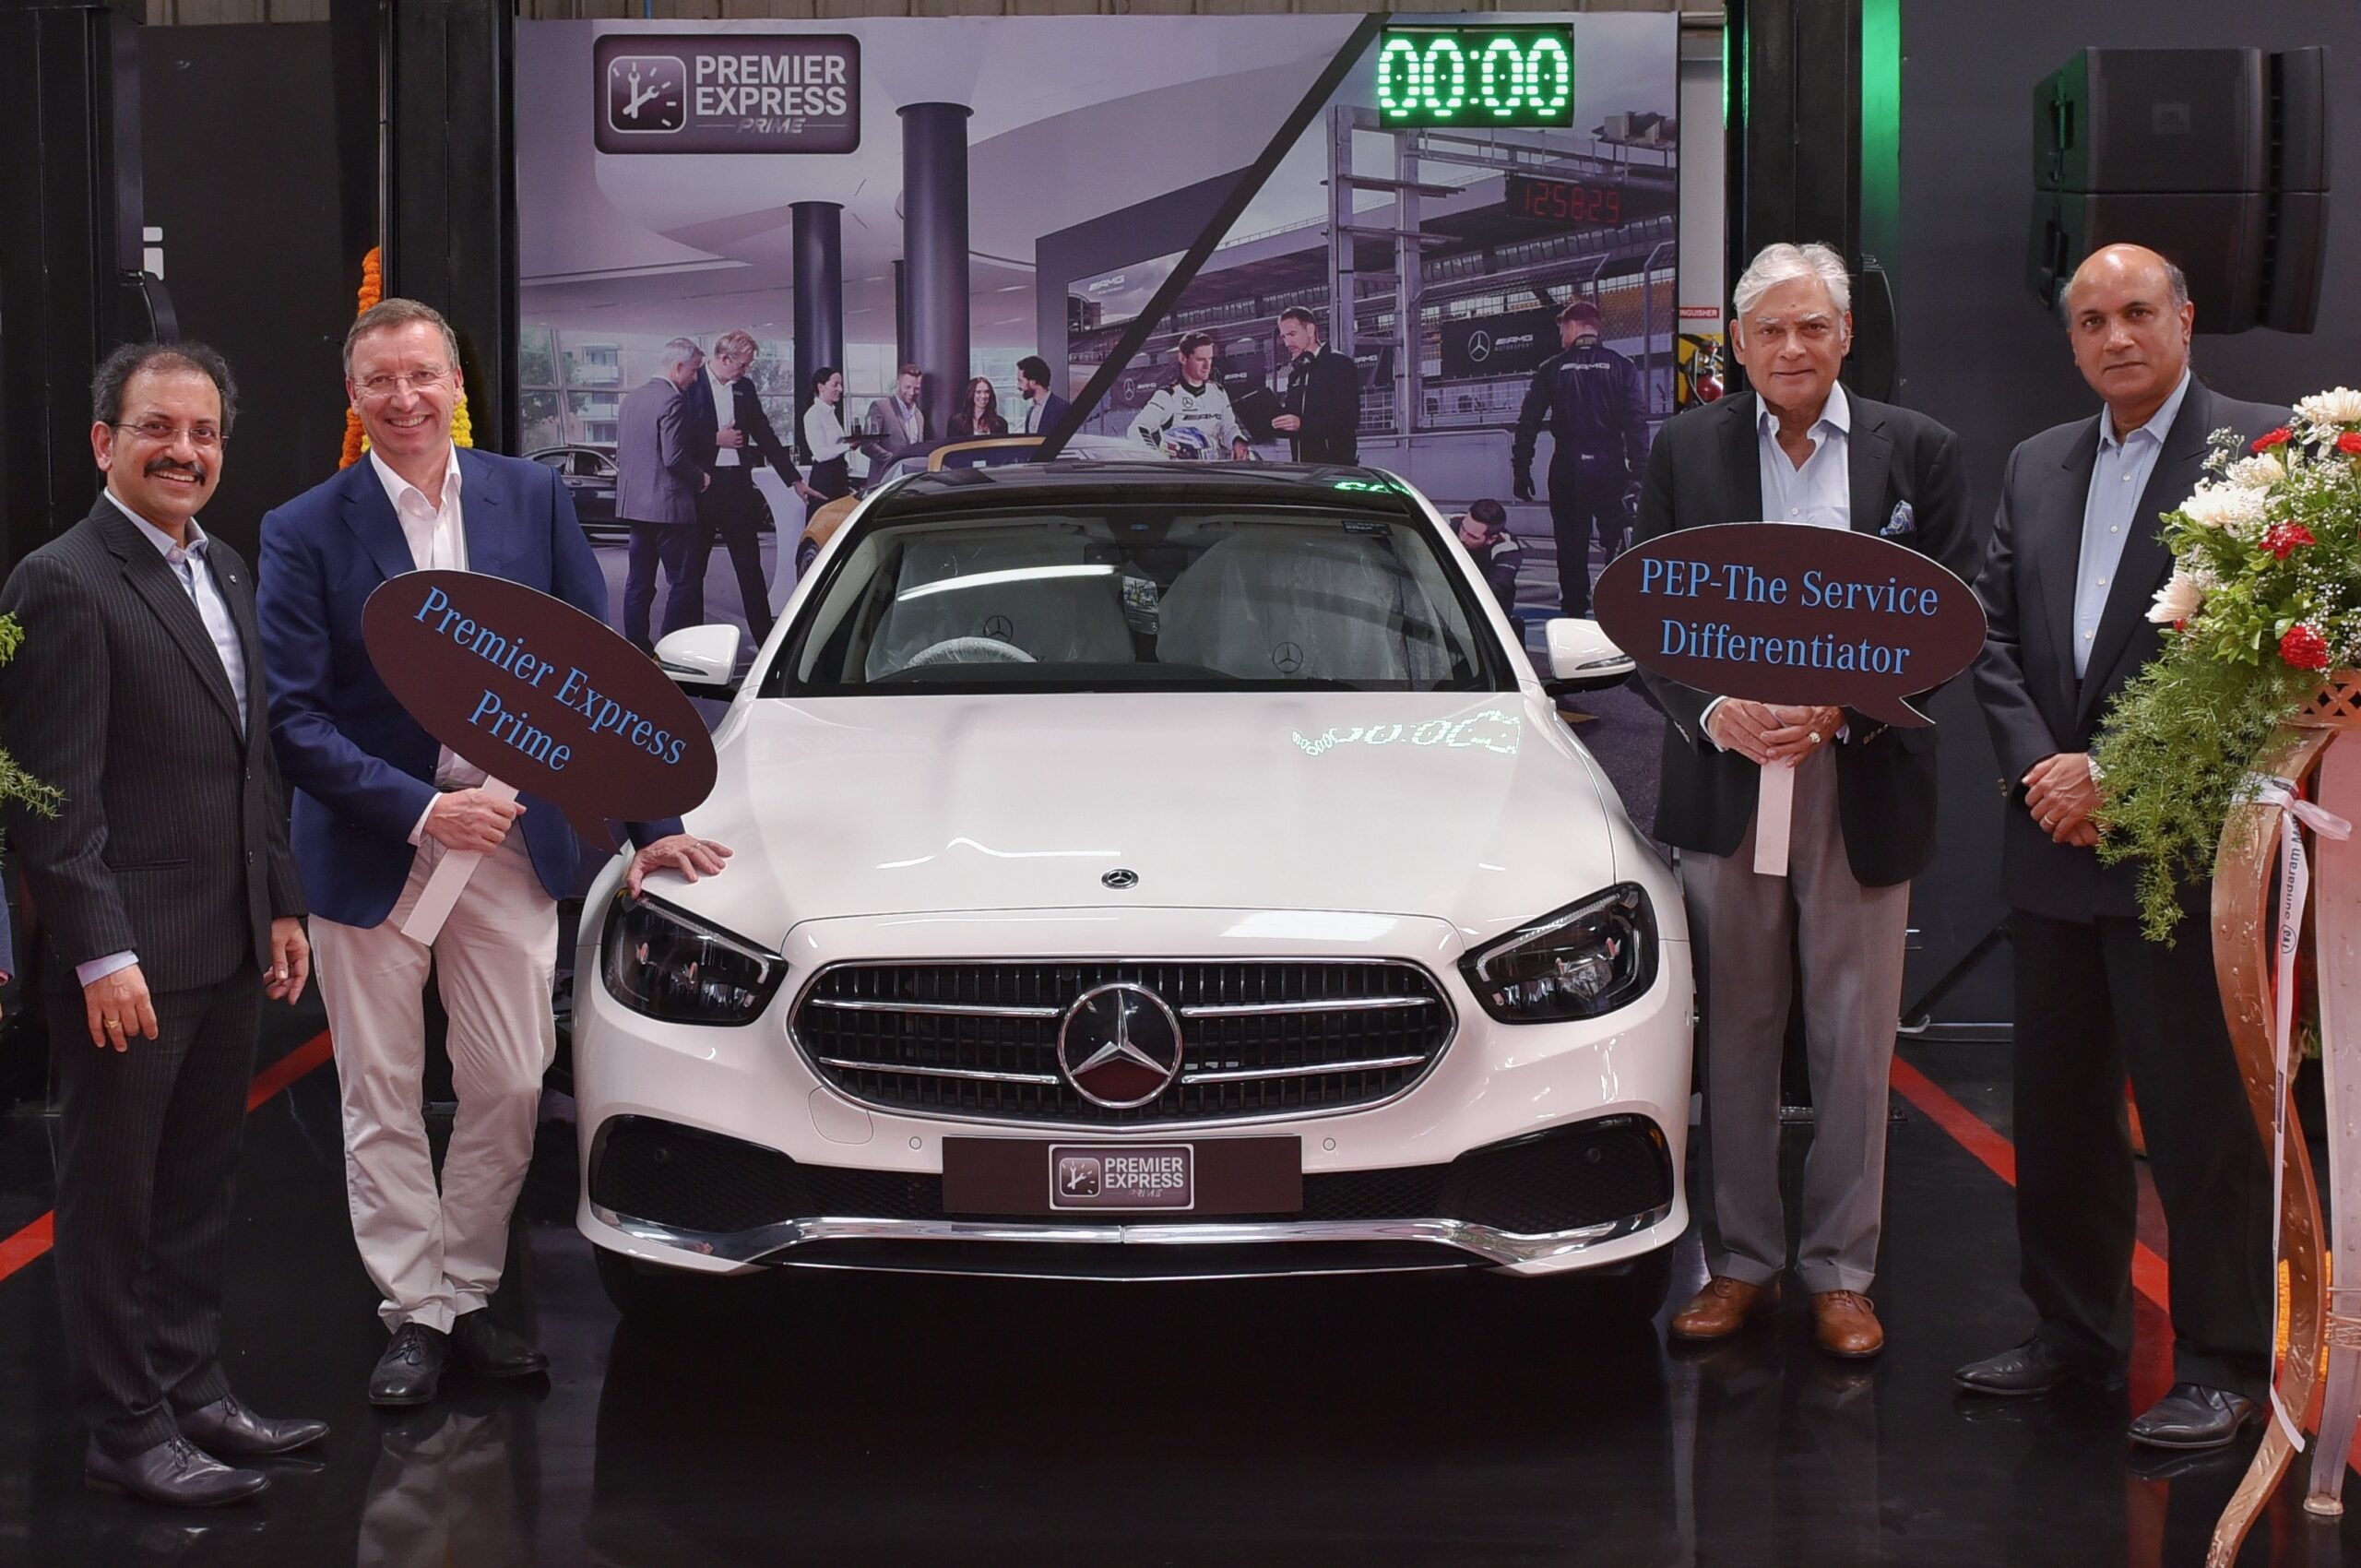 Mercedes-Benz India Premiere Express Prime Outlets Reach 25 Locations (1)